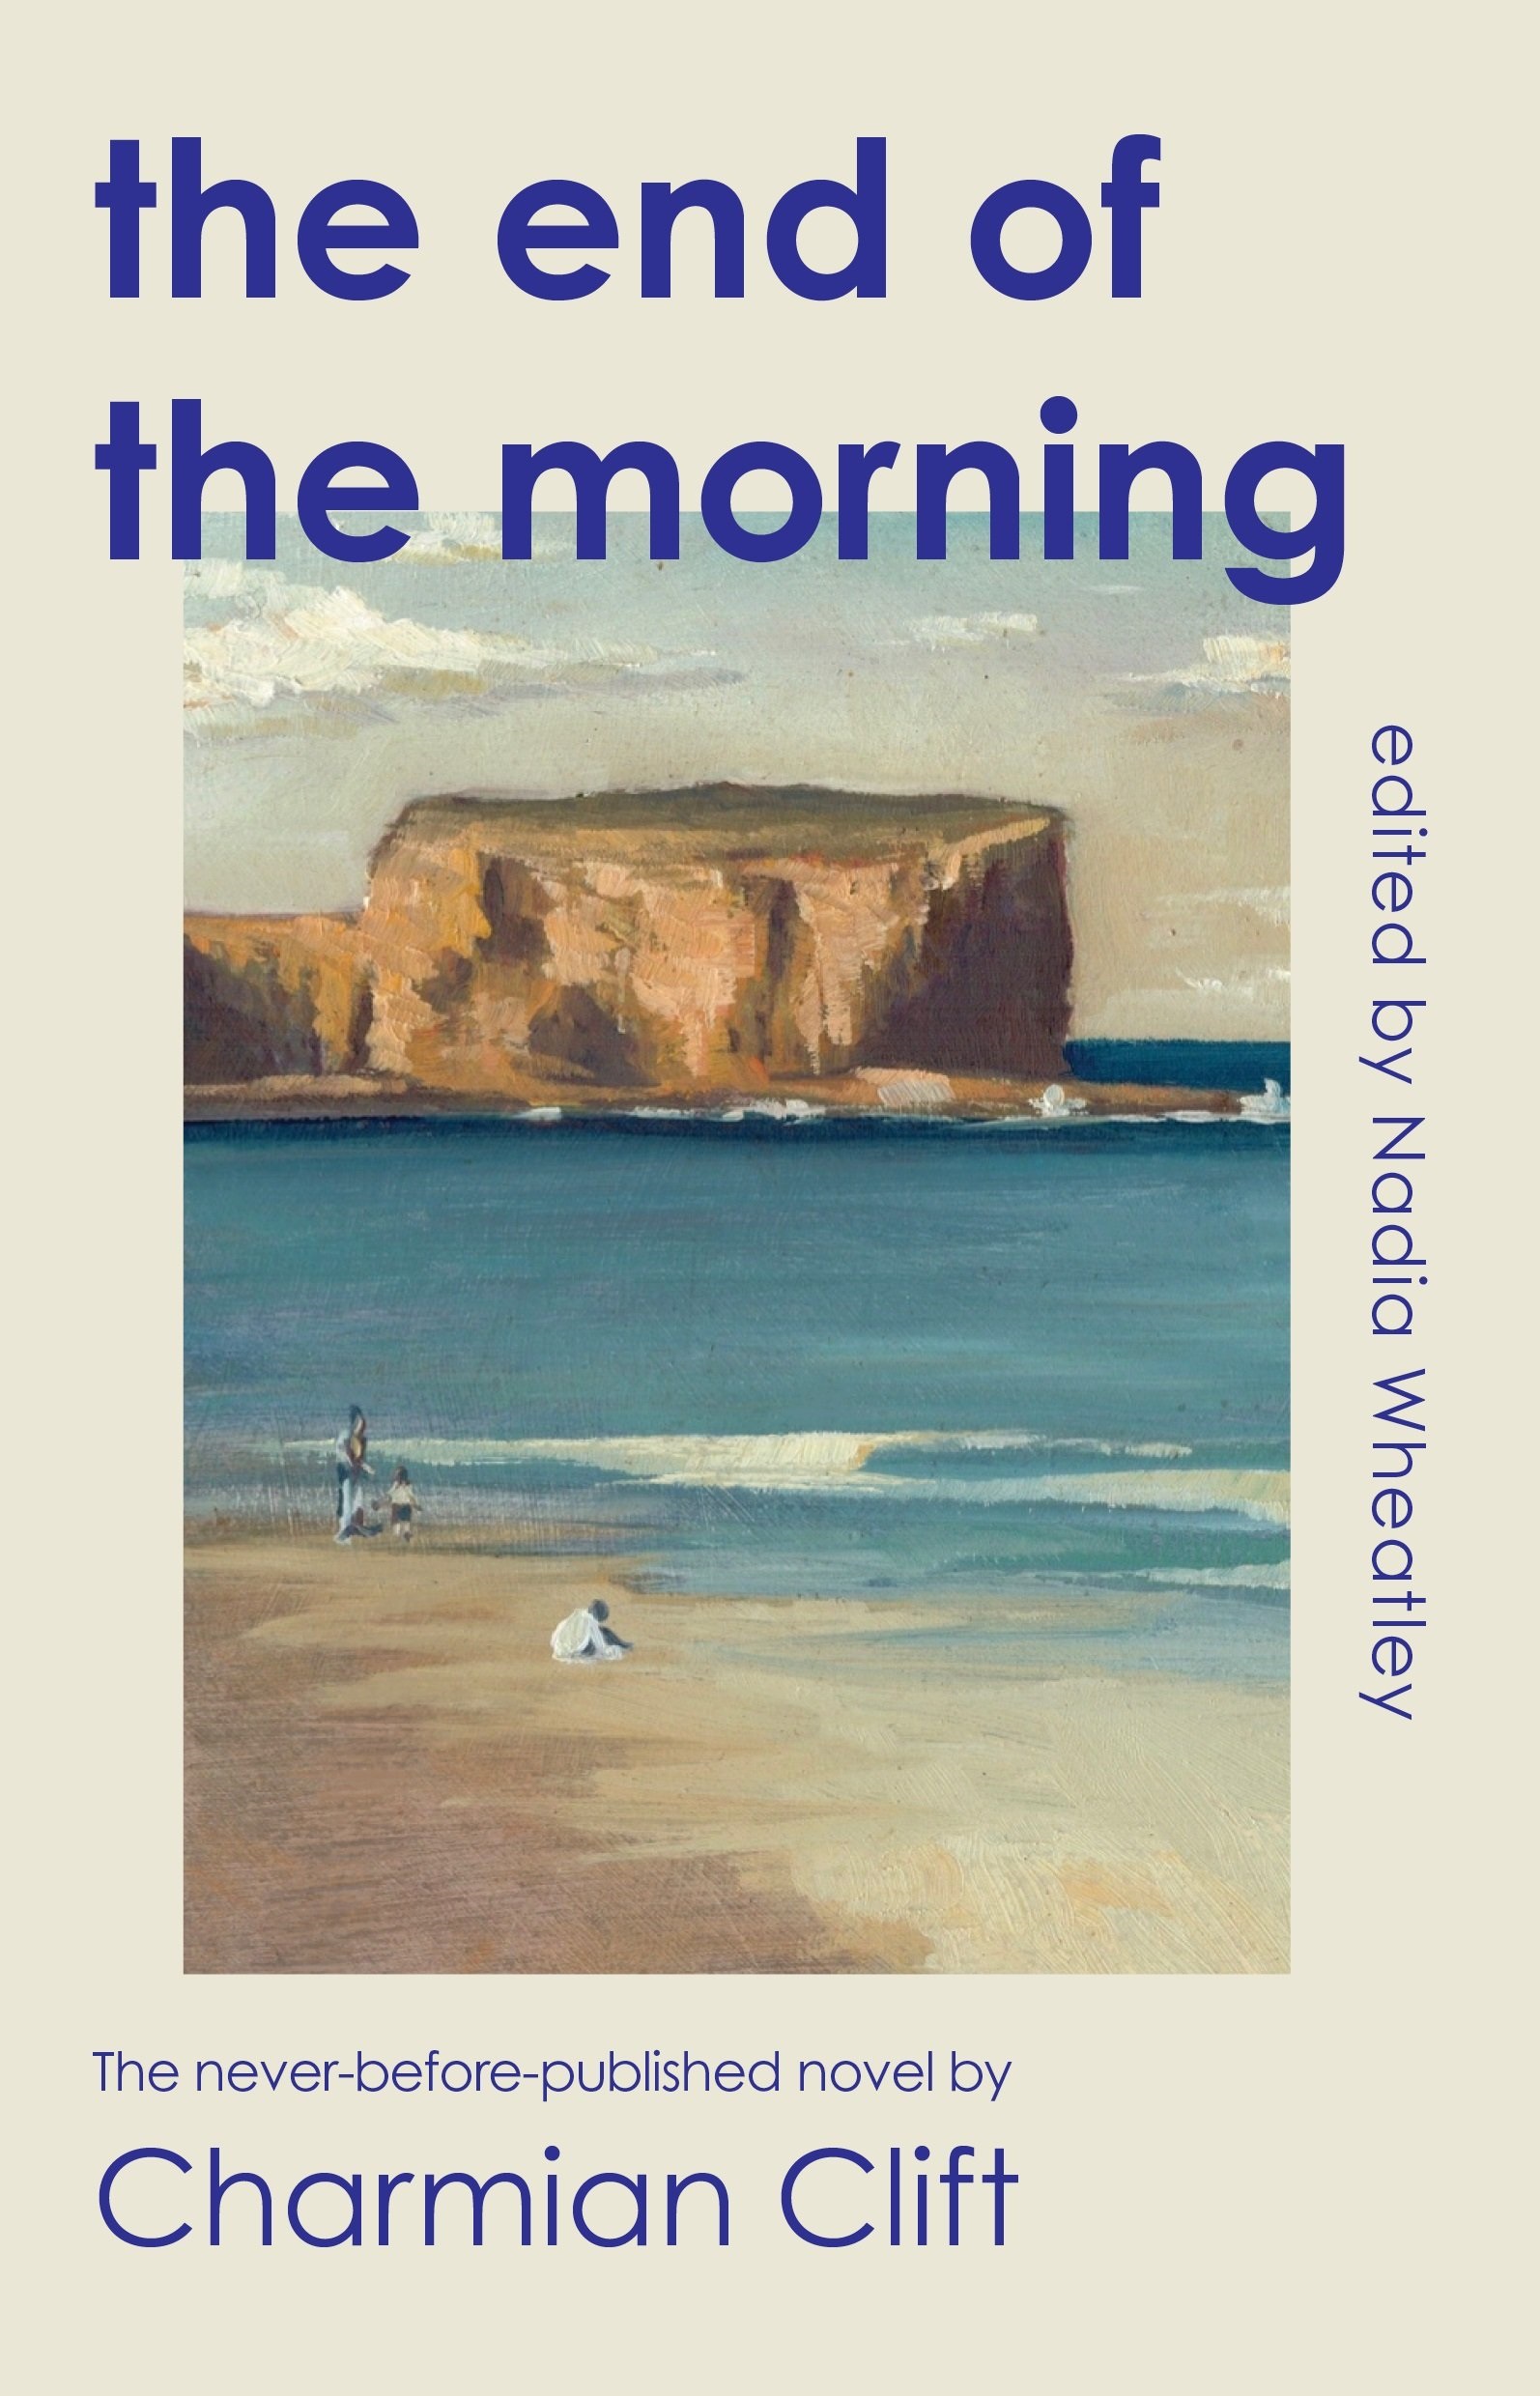 A book cover showing a painted landscape of a beach and a headland 